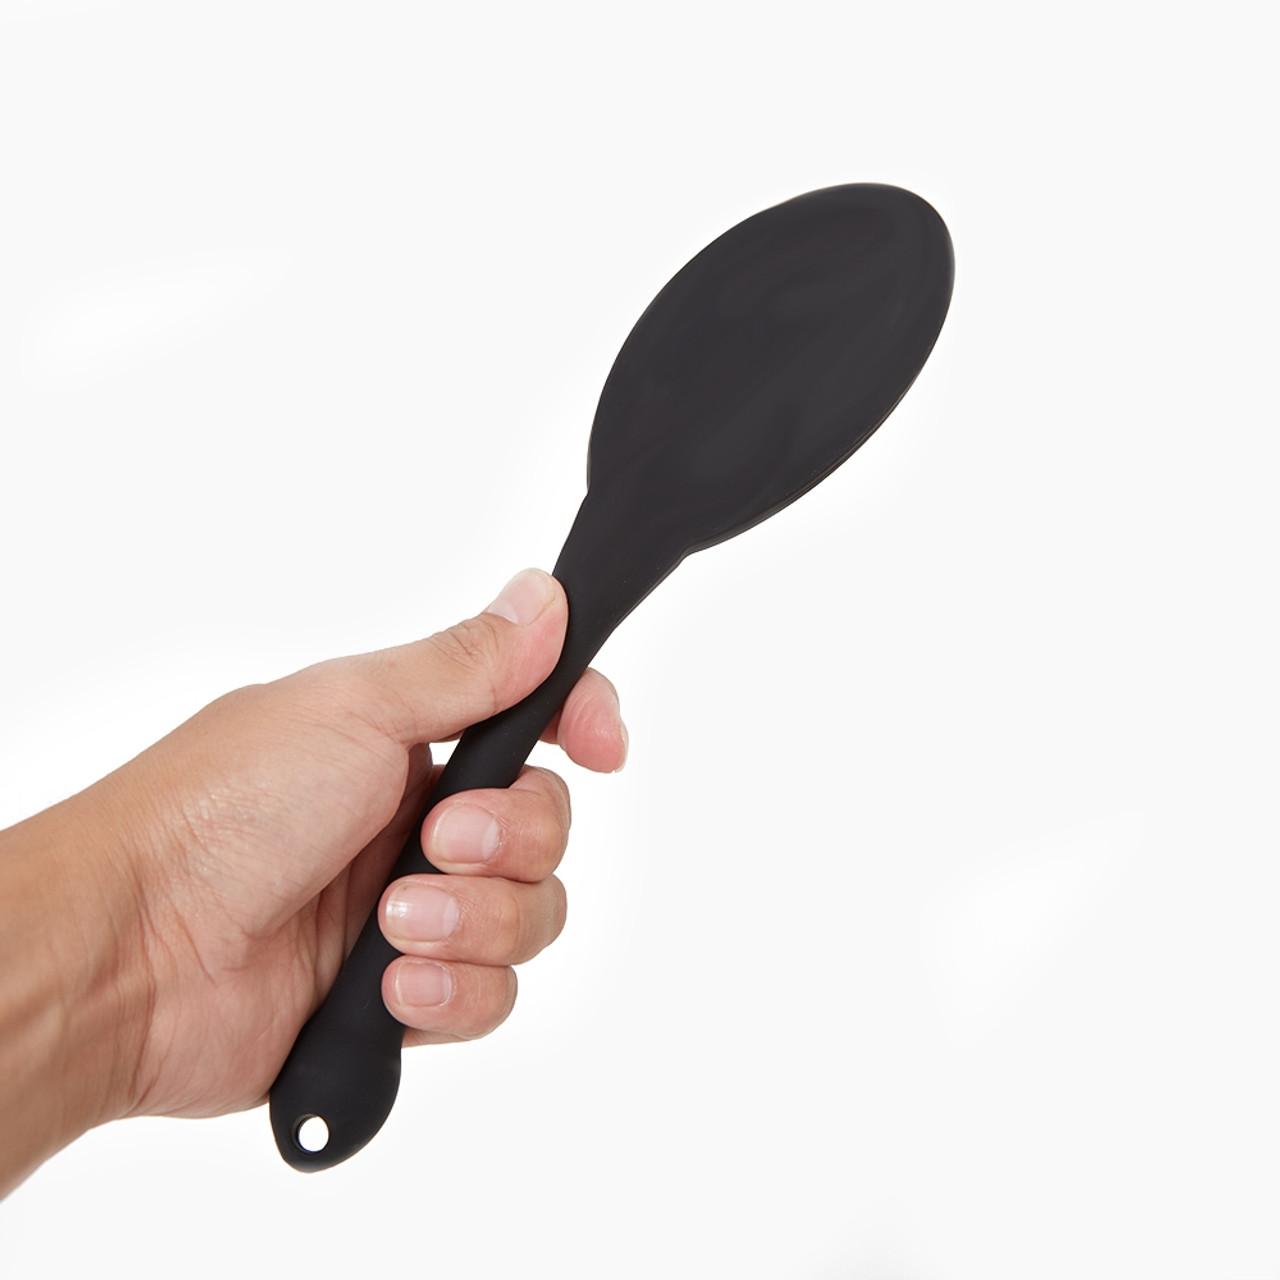 Tantus Silicone Gen Paddle held in hand